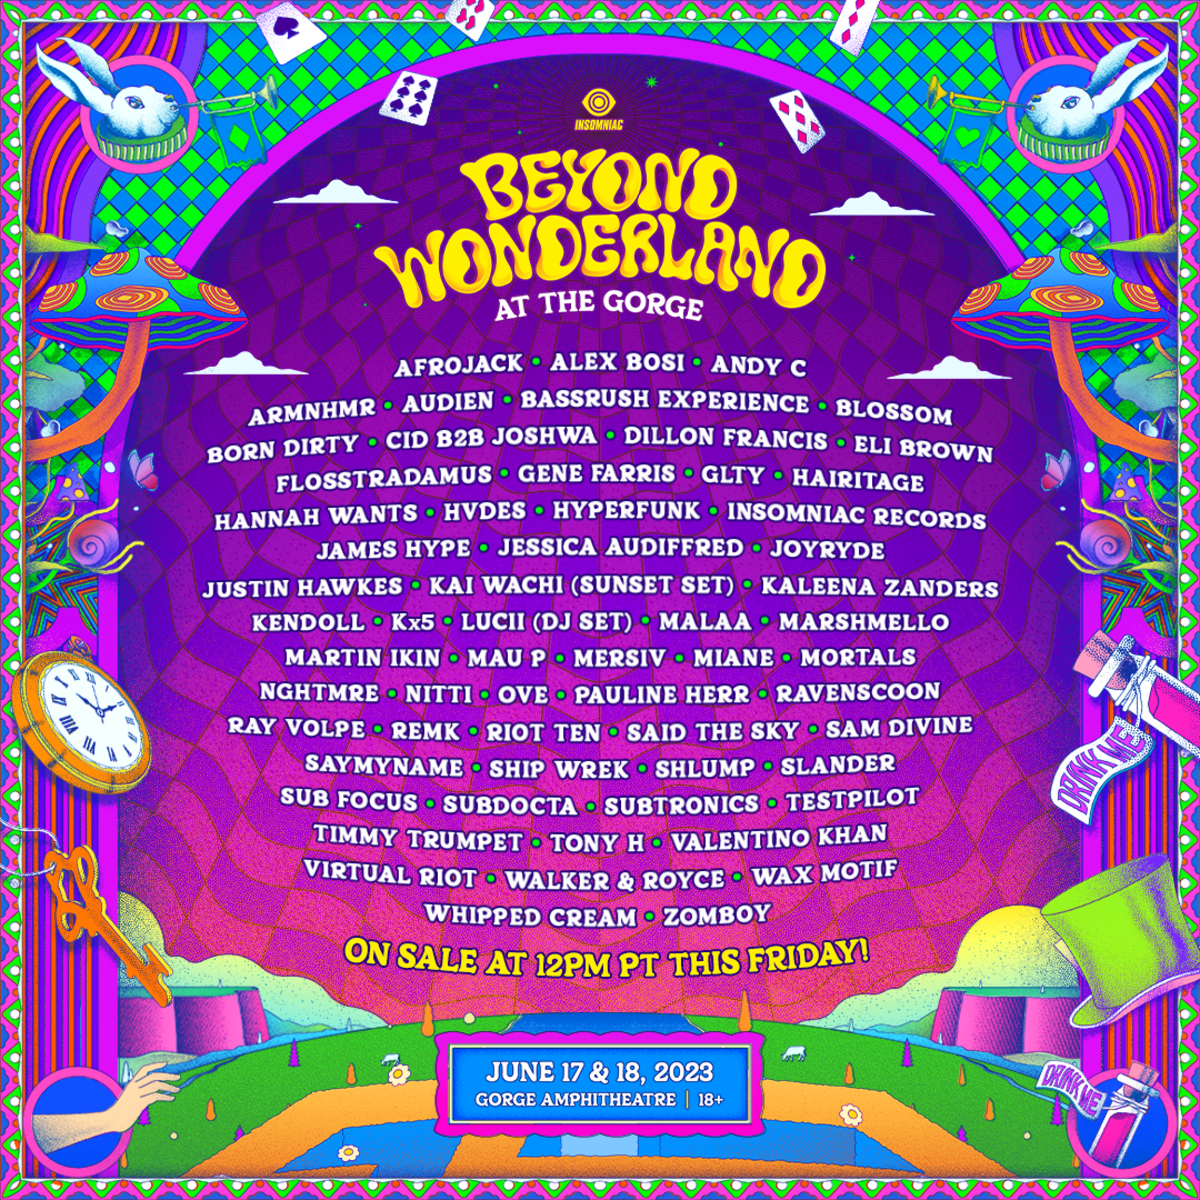 The 2023 lineup for the Beyond Wonderland at The Gorge music festival includes, Subtronics, Dillon Francis, Said The Sky, Kx5, Marshmello and more.